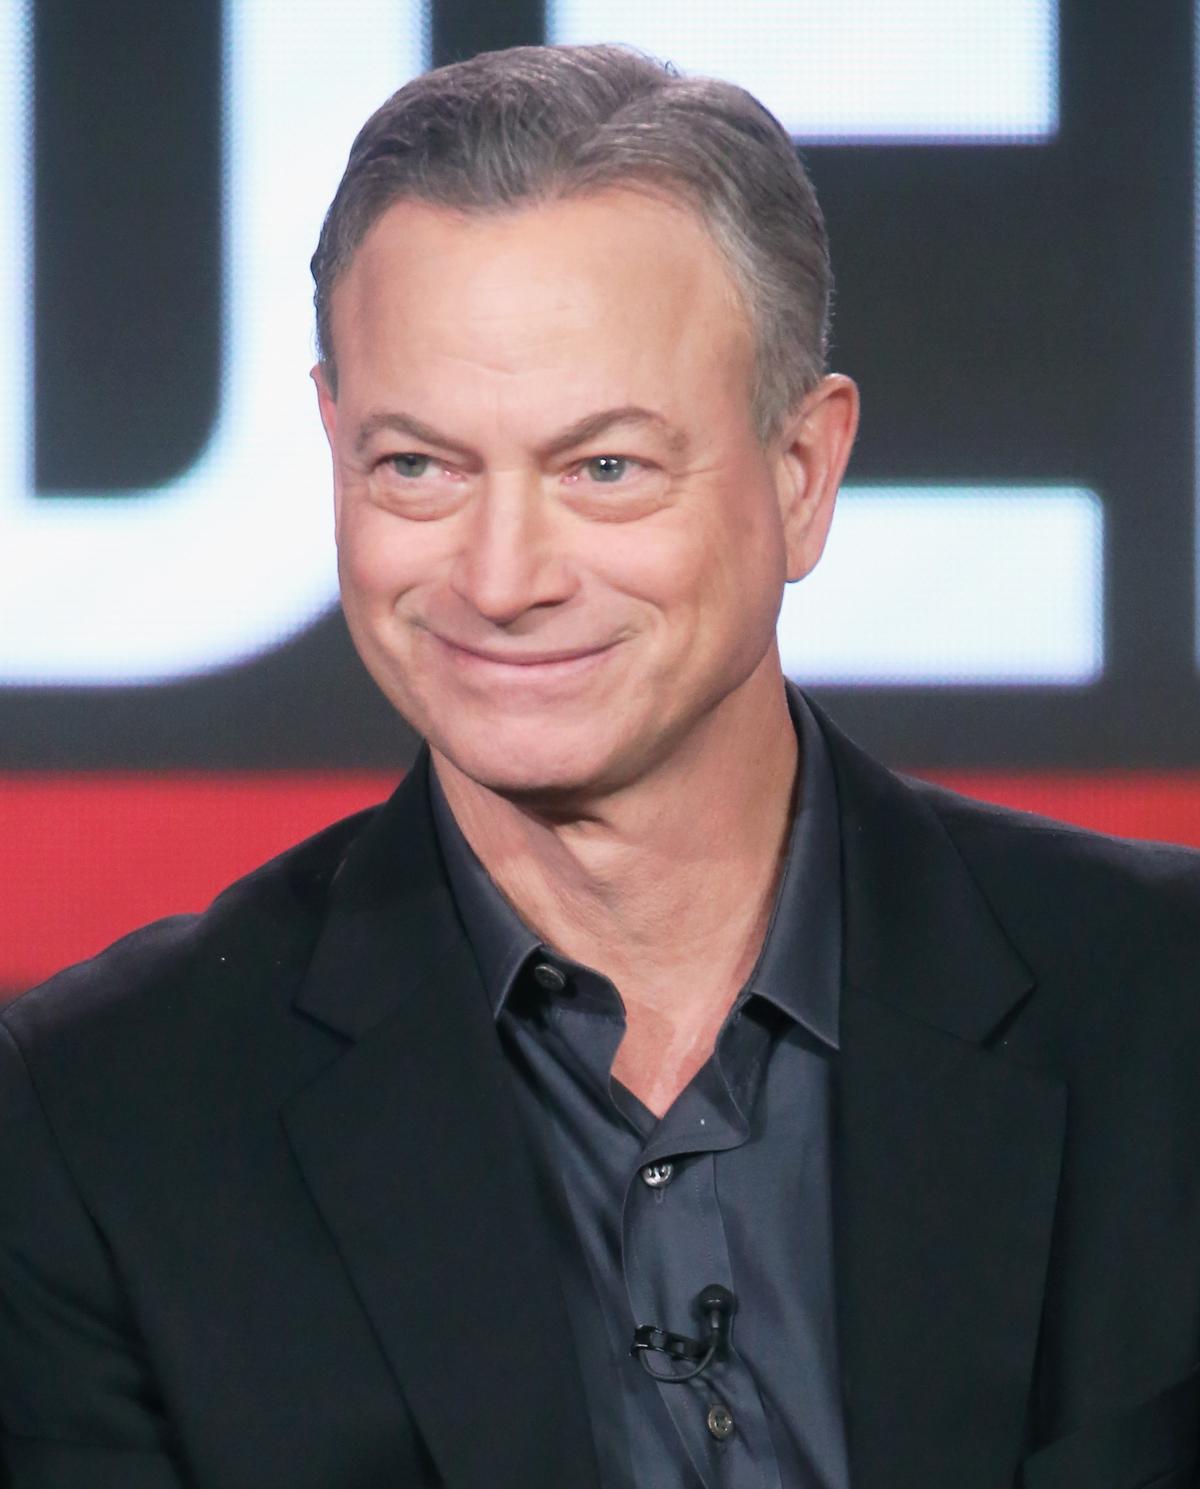 Sinise speaks onstage during the "Criminal Minds: Beyond Borders" panel discussion at the 2015 Winter TCA Tour in Pasadena, Calif., on Jan. 12, 2016. (Frederick M. Brown/Getty Images)